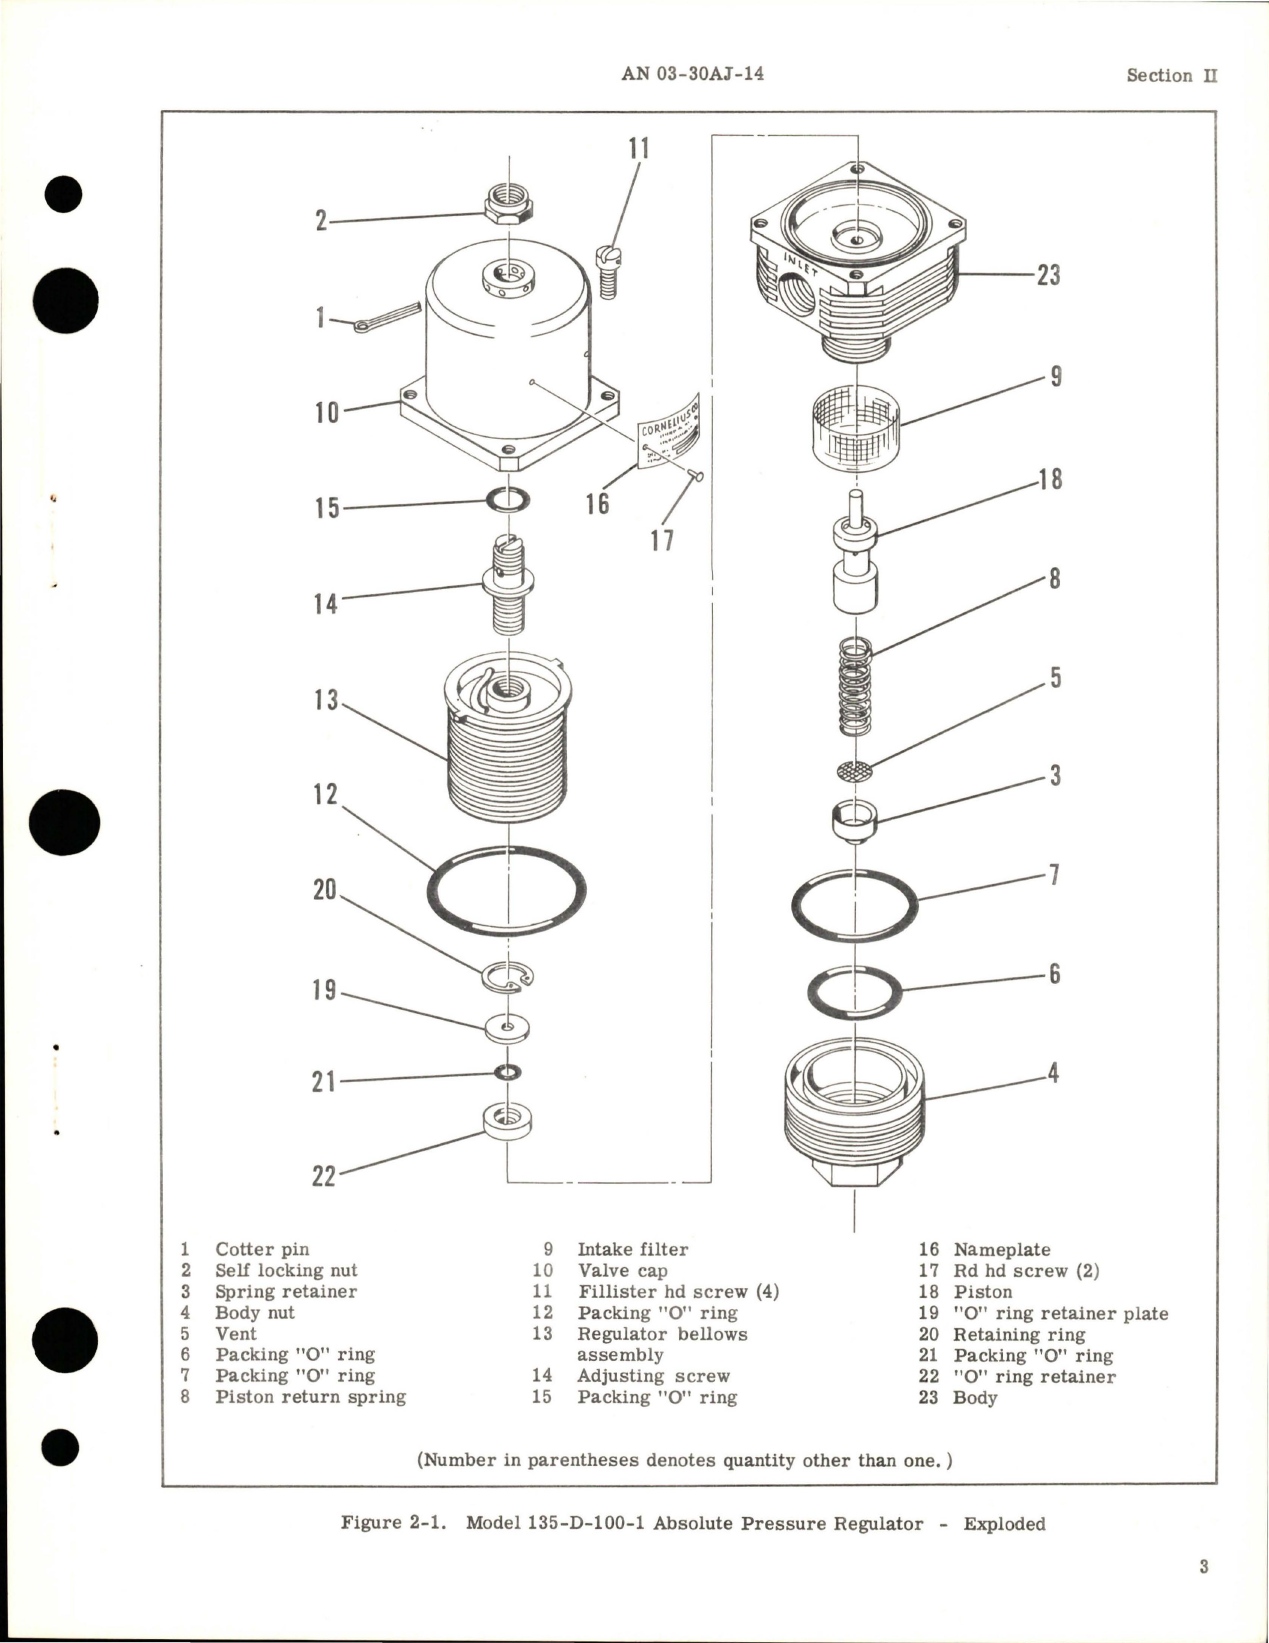 Sample page 5 from AirCorps Library document: Overhaul Instructions for Absolute Pressure Regulator - Models 135-D-100-1, 135-D-100-3, 135-D-100-4, and 135-D-100-5